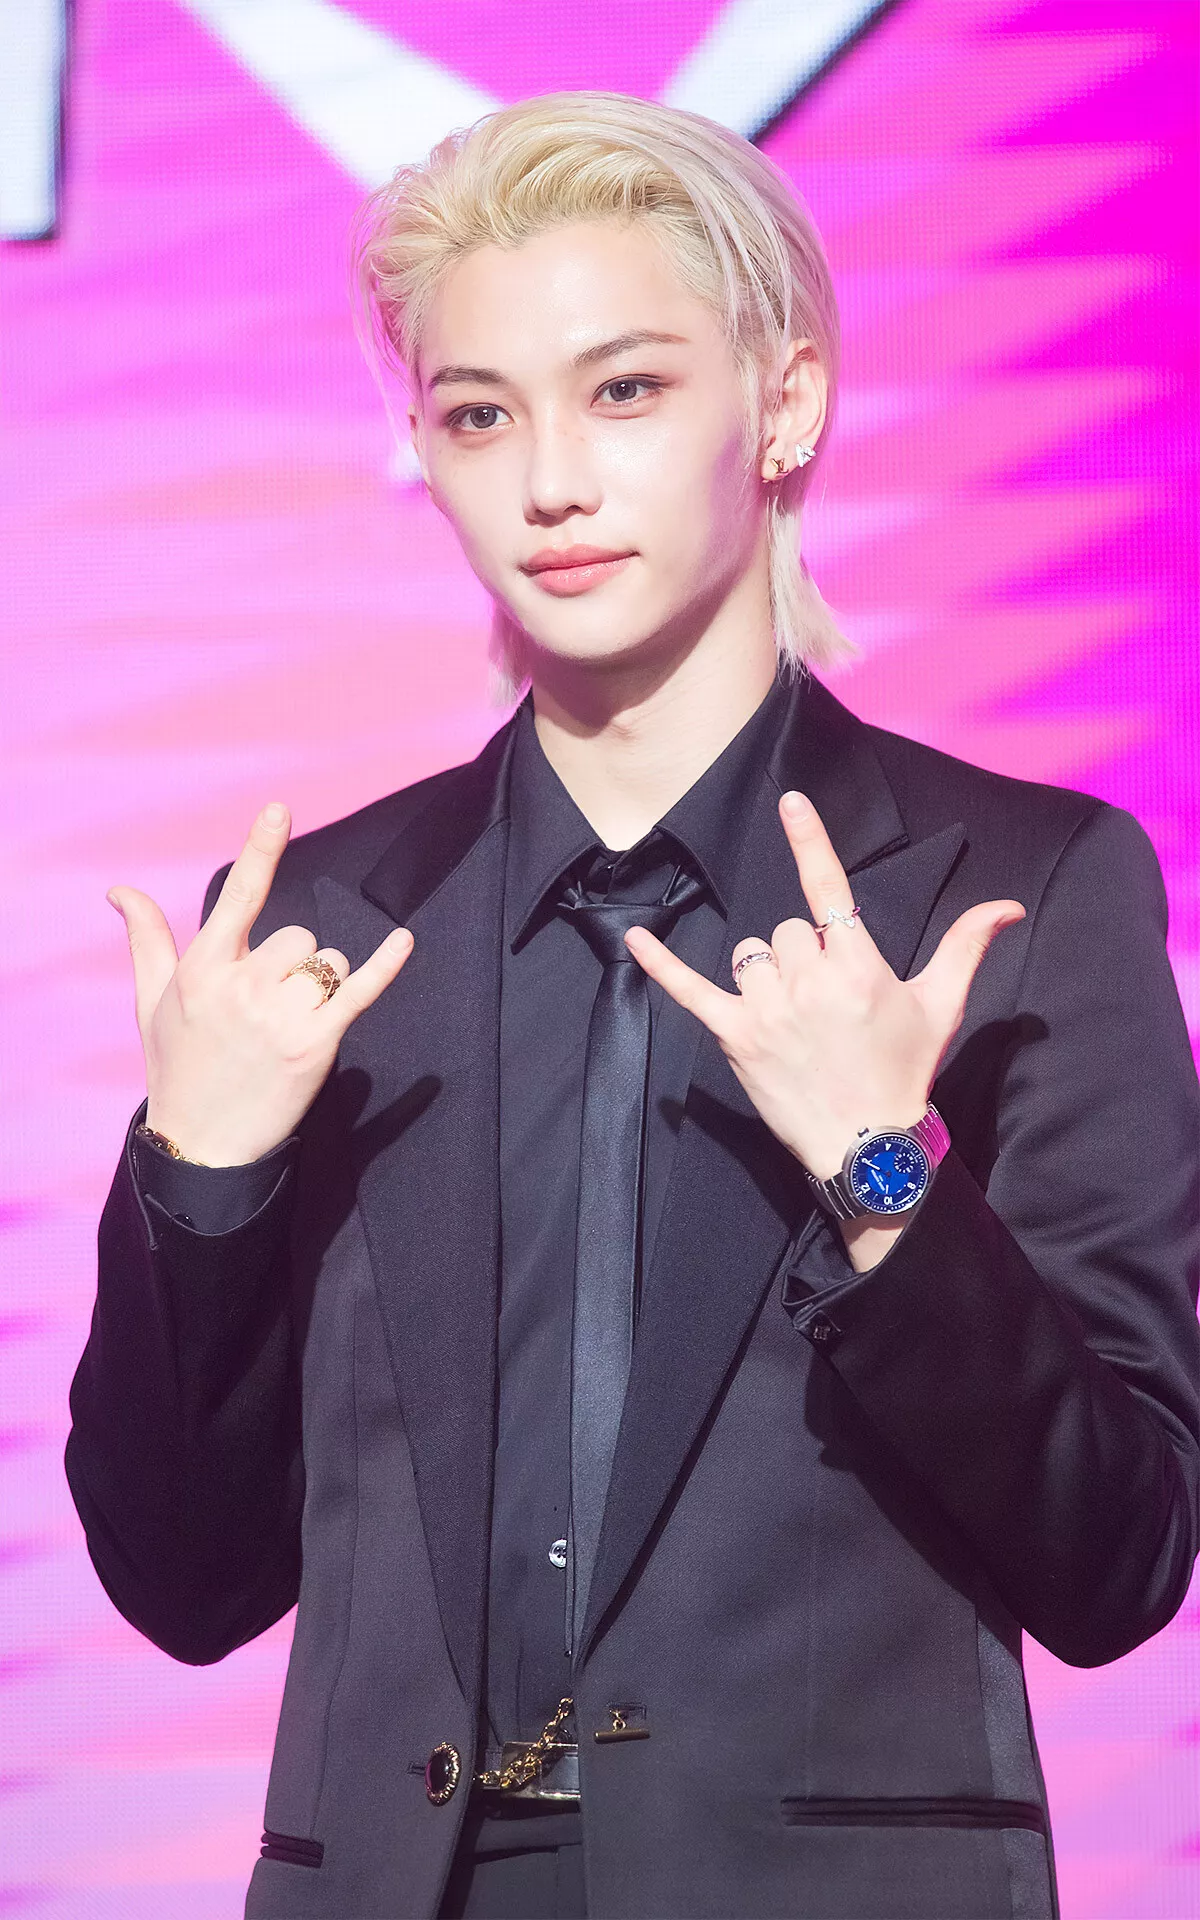 &quot;Felix of Stray Kids exudes charm in a Louis Vuitton black tuxedo and accessorizes with the brand’s signature fine jewelry, making a bold fashion statement at the '樂-STAR' EP press conference.&quot;